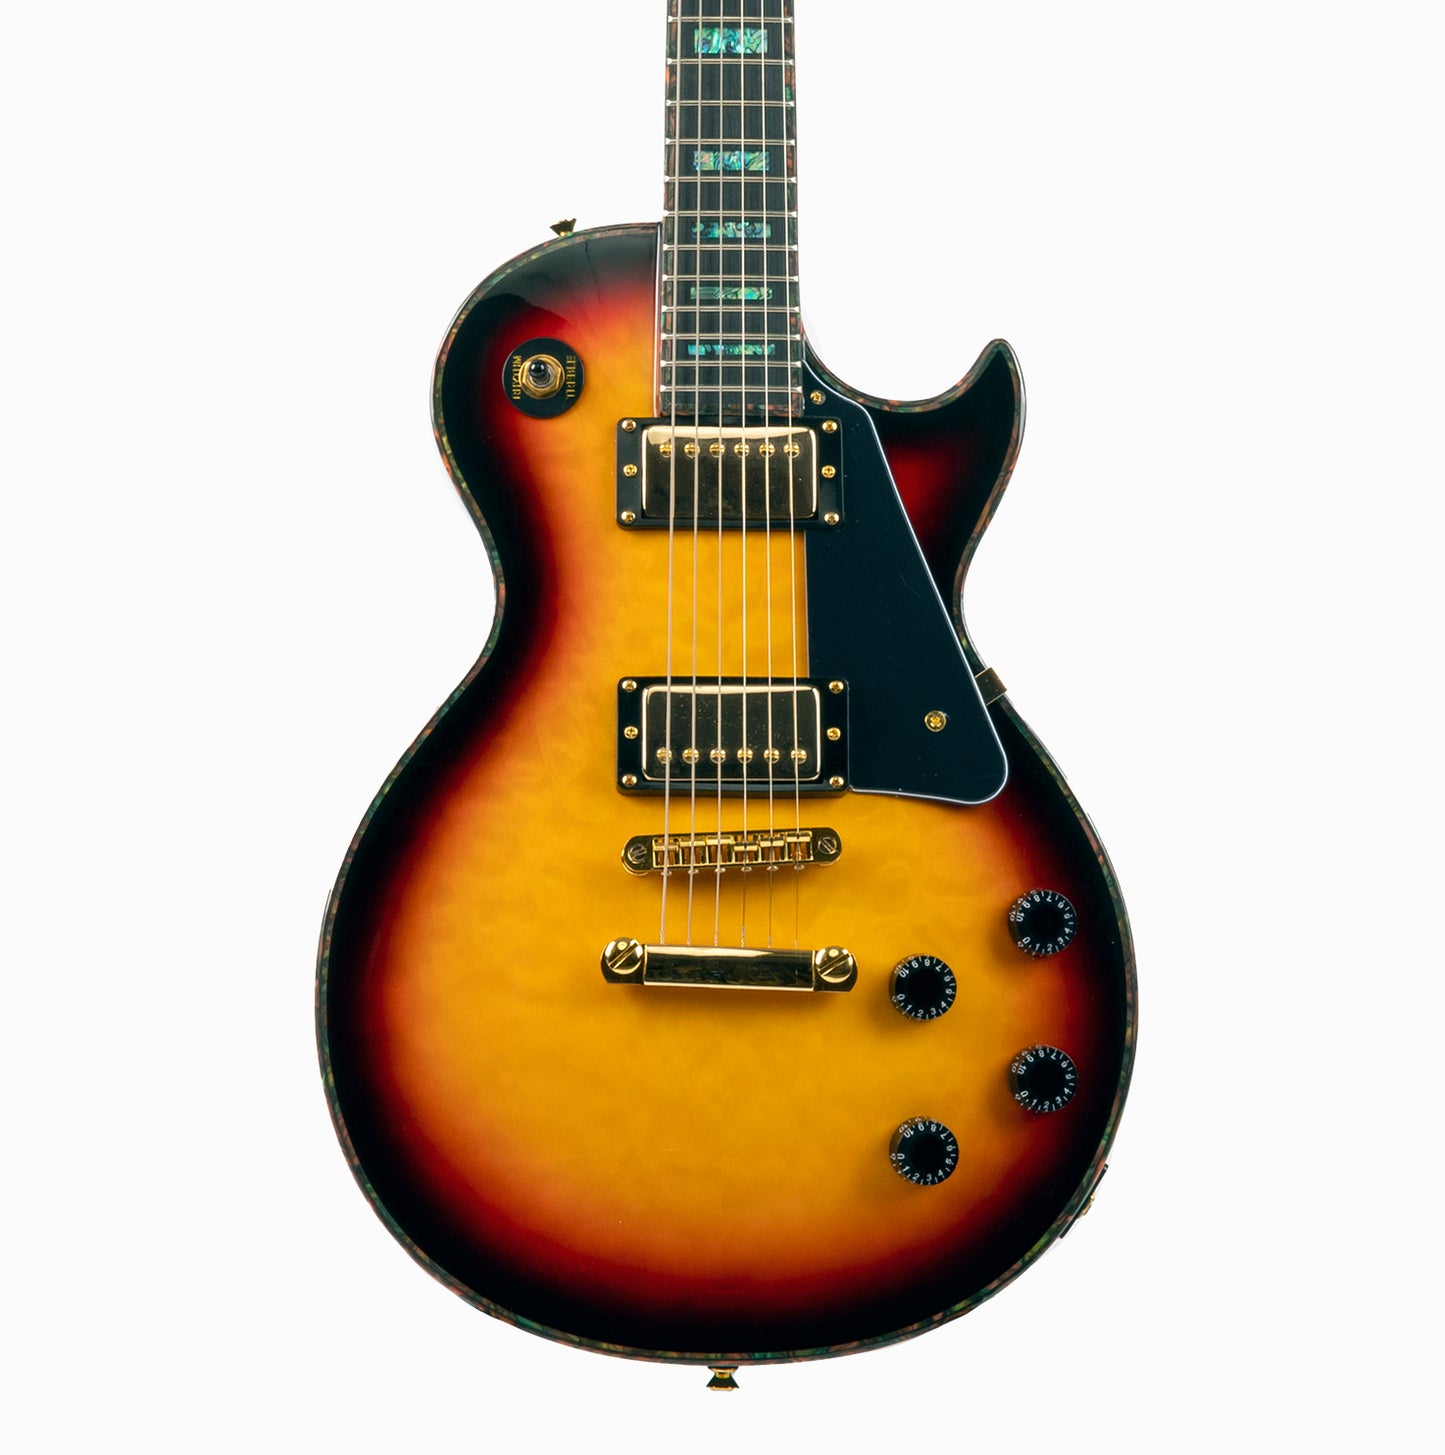 Allen Eden Southbound V2 3-Tone Sunburst with Abalone Binding and Inlays